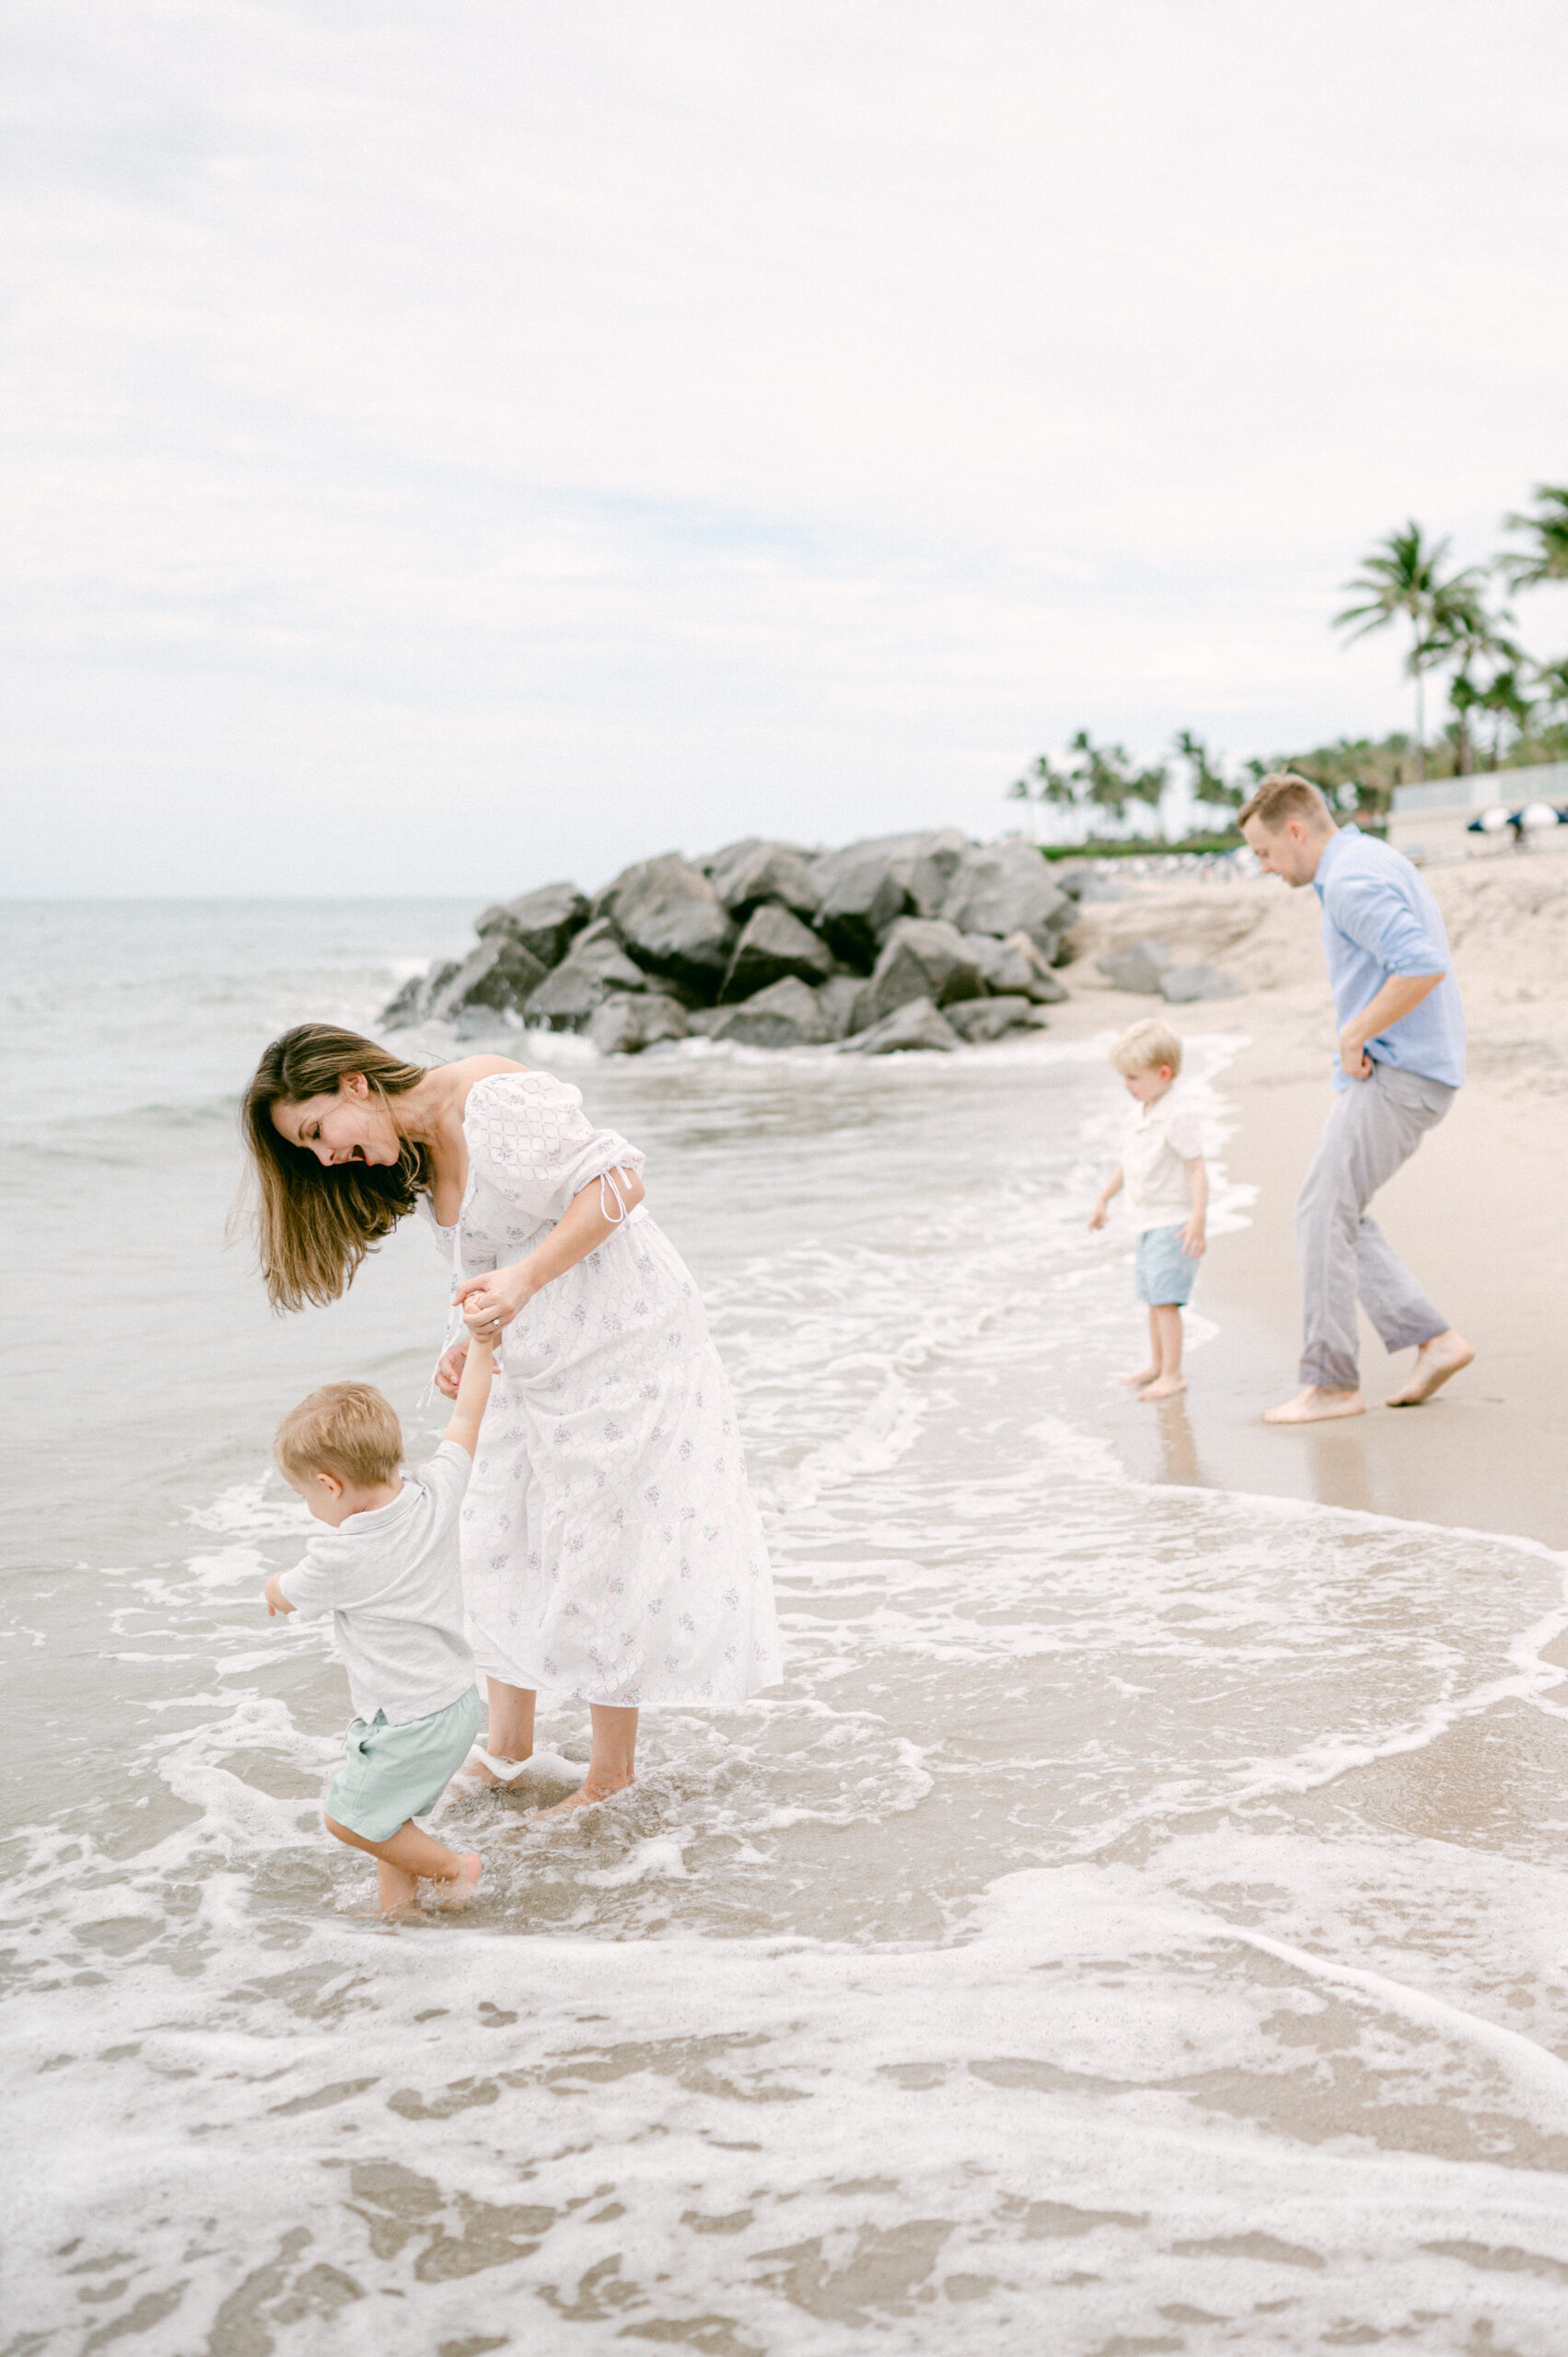 Light and Airy Miami Photography at the beach